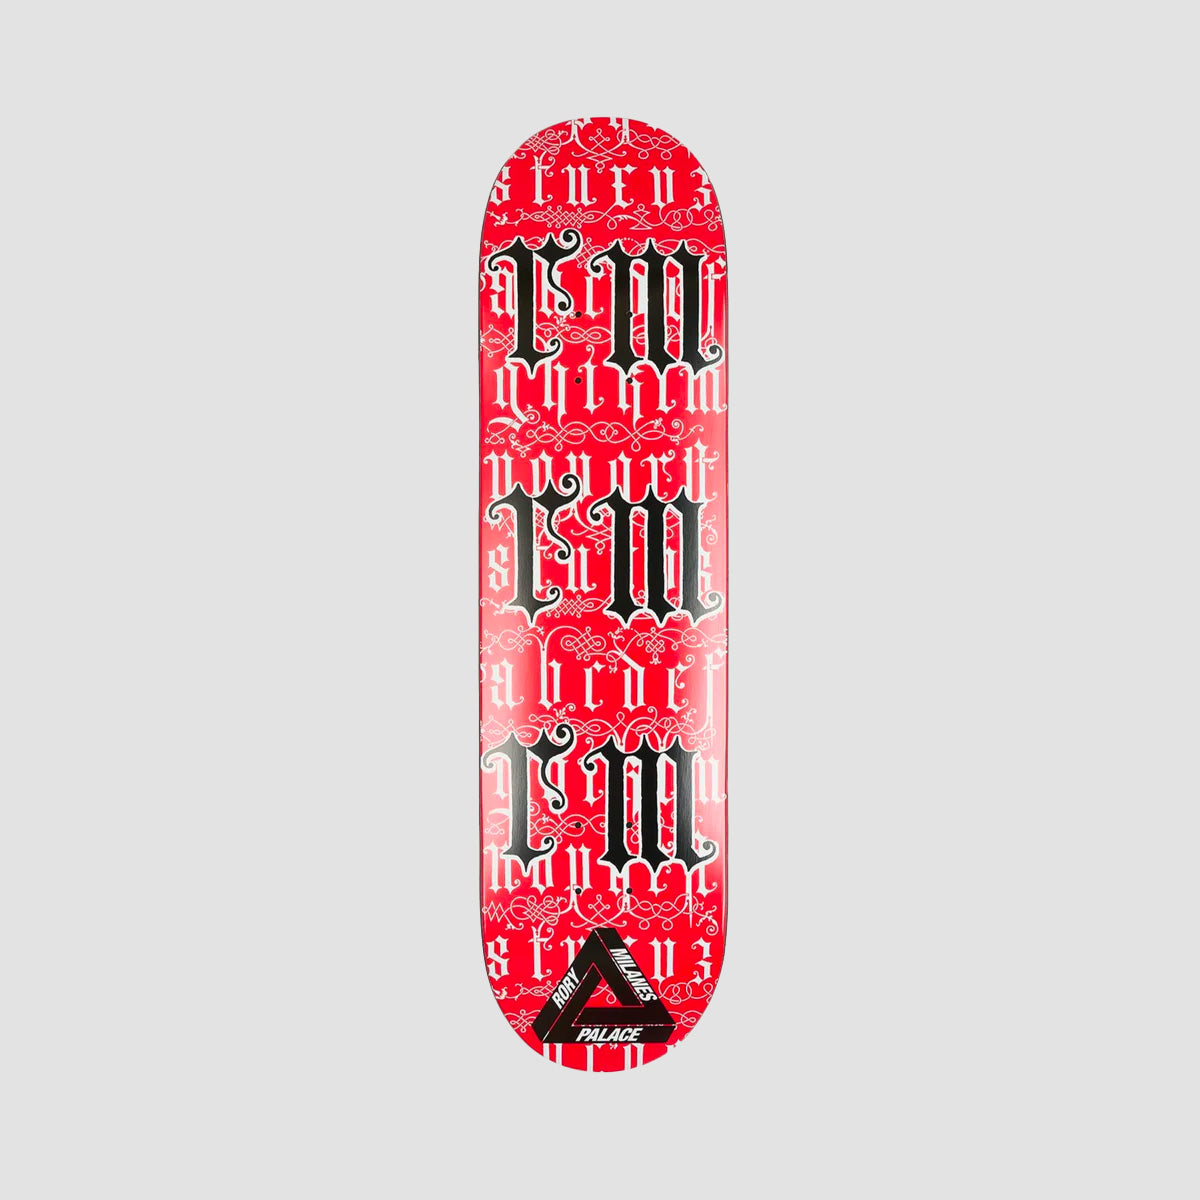 Palace Rory Milanes Pro S33 Skateboard Deck - 8.06"